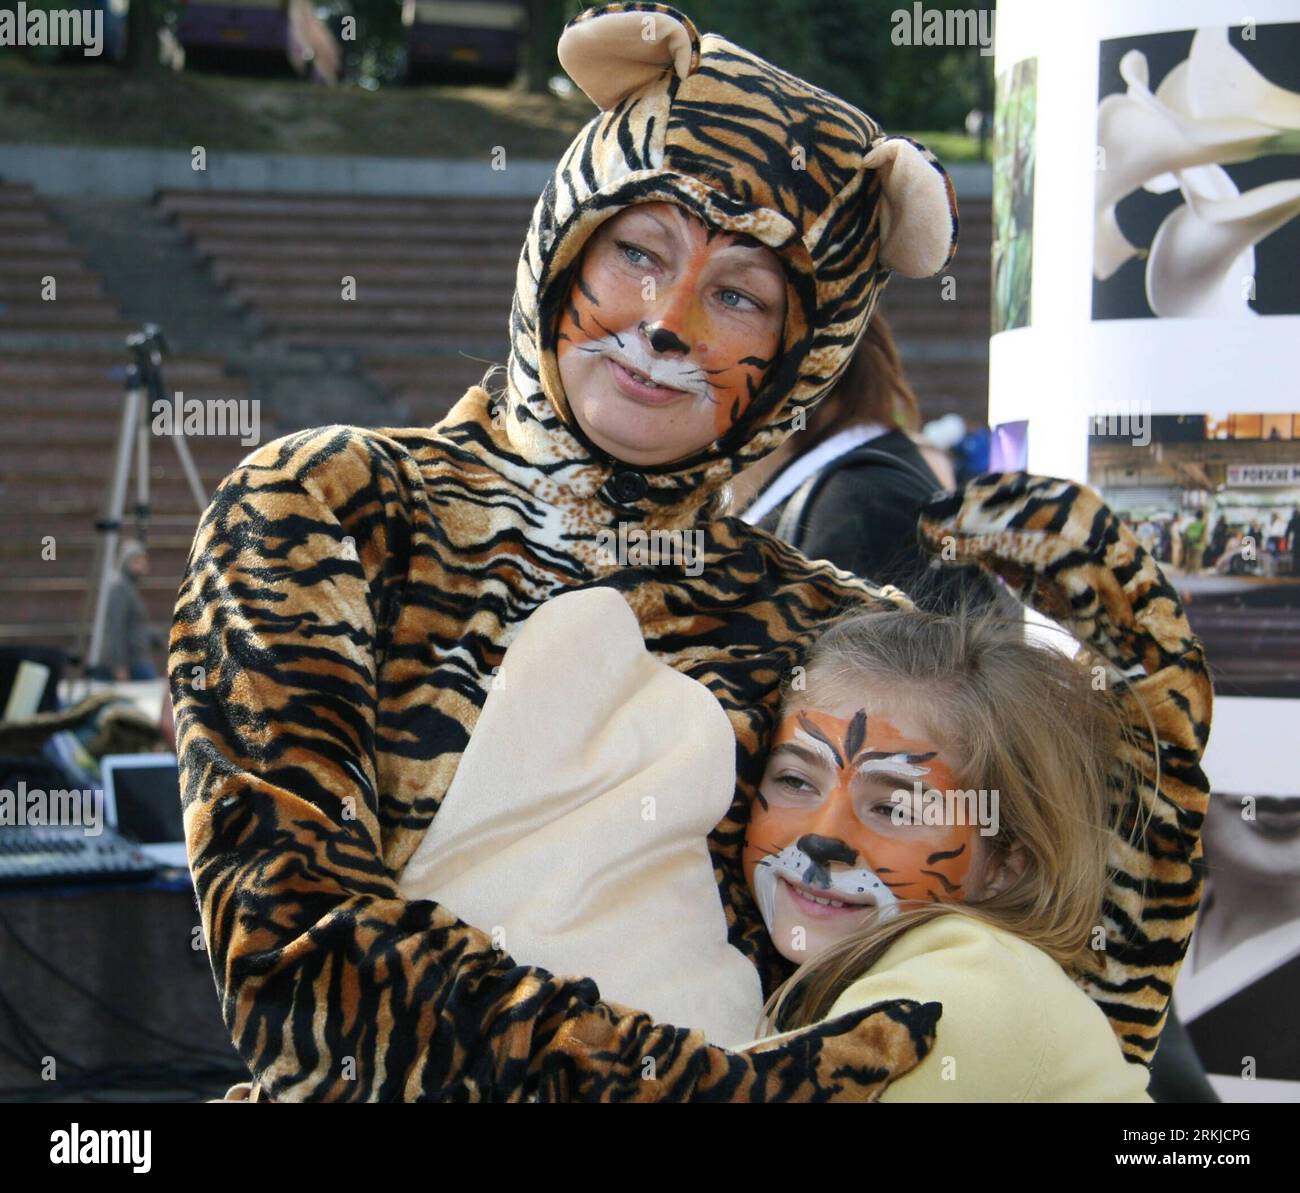 Bildnummer: 56101878  Datum: 24.09.2011  Copyright: imago/Xinhua (110925) -- KIEV, Sept. 25, 2011 (Xinhua) -- A mother and her daughter dress as tigers to join the environmental campaign in Kiev, capital of Ukraine, Sept. 24, 2011. During Moving Planet , a one-day environmental campaign held in Kiev on Saturday, Ukrainian teachers, teenagers, atheletes and retirees joined various activities including marathon, swimming, dancing and kite-flying to call on a shift to cleaner energy from fossil fuel, a main source of global climate change. (Xinhua/Olga Tarnavskaya) (lmm) UKRAINE-KIEV-ENVIRONMENTA Stock Photo